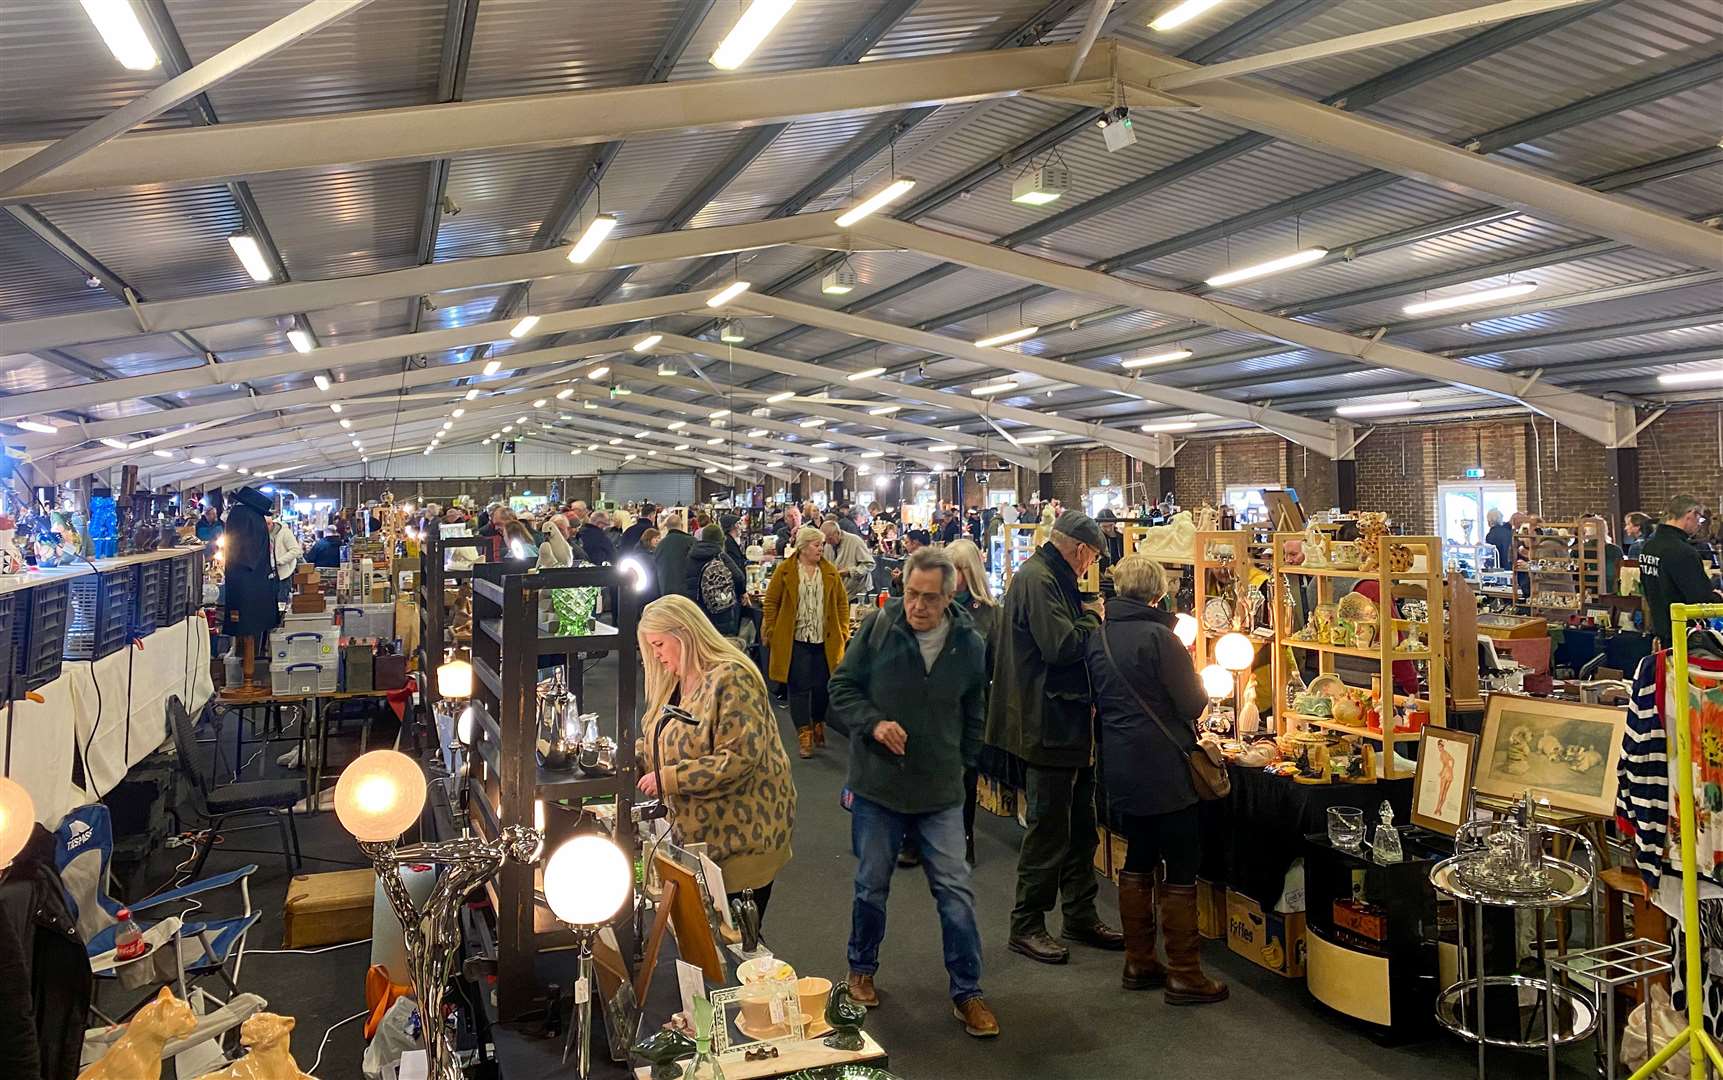 There were two huge indoor halls and lots of outdoor space filled with hundreds of sellers